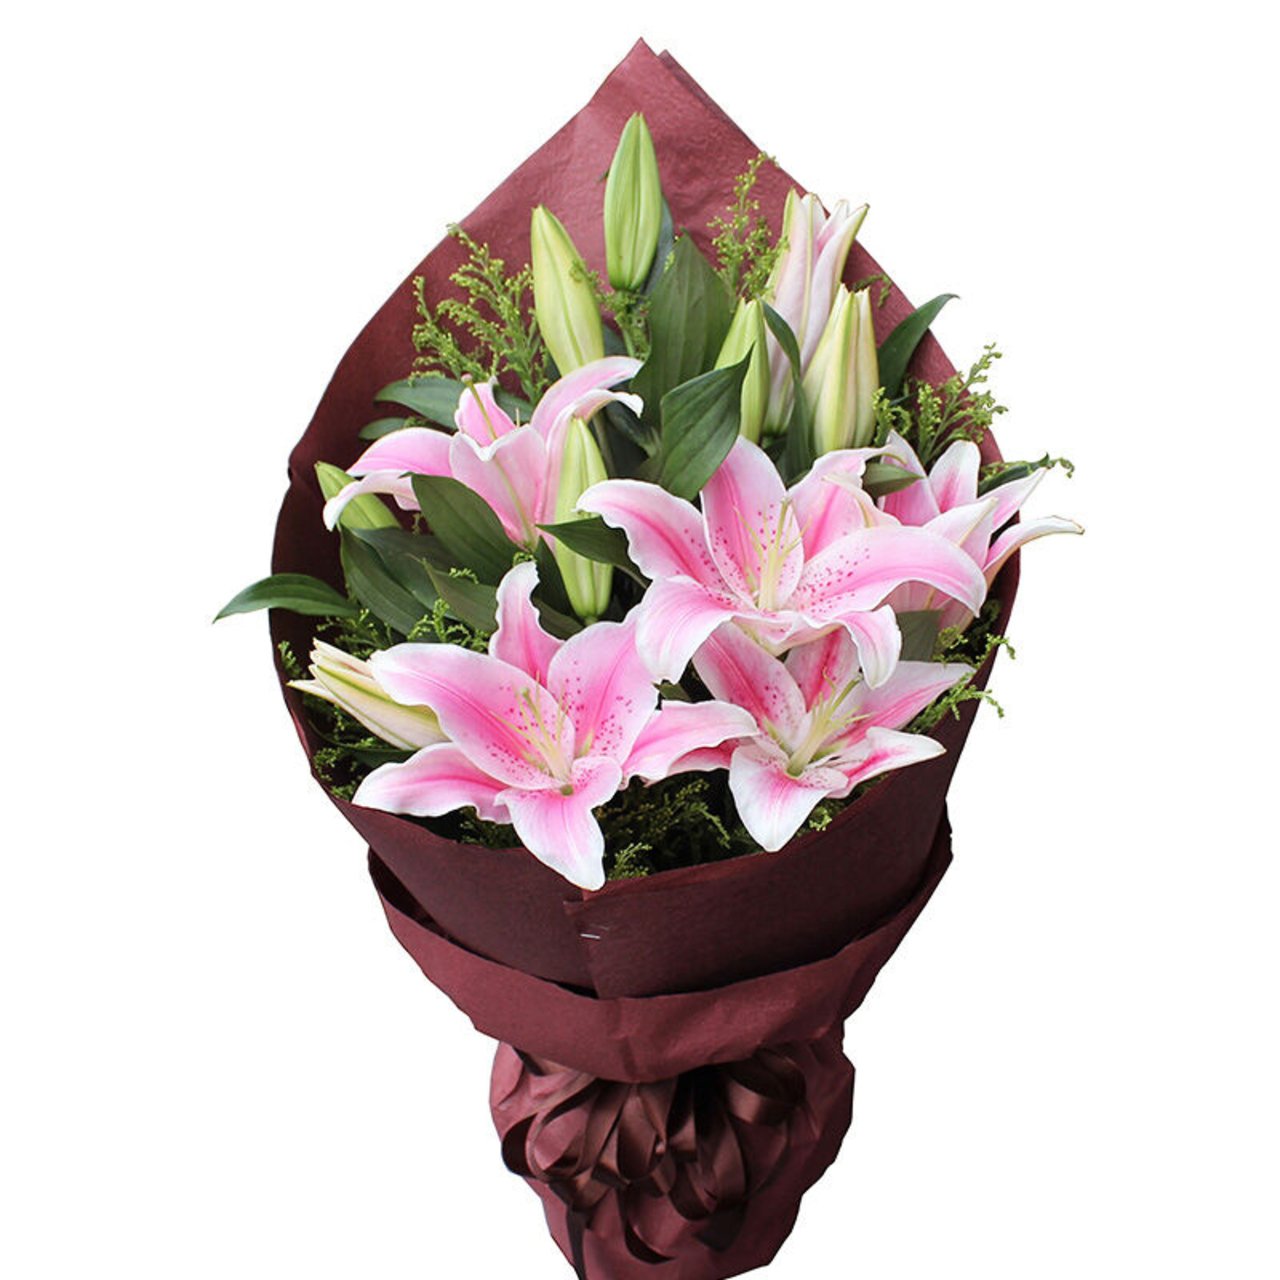 Like spring breeze(
5 long pink lilies-